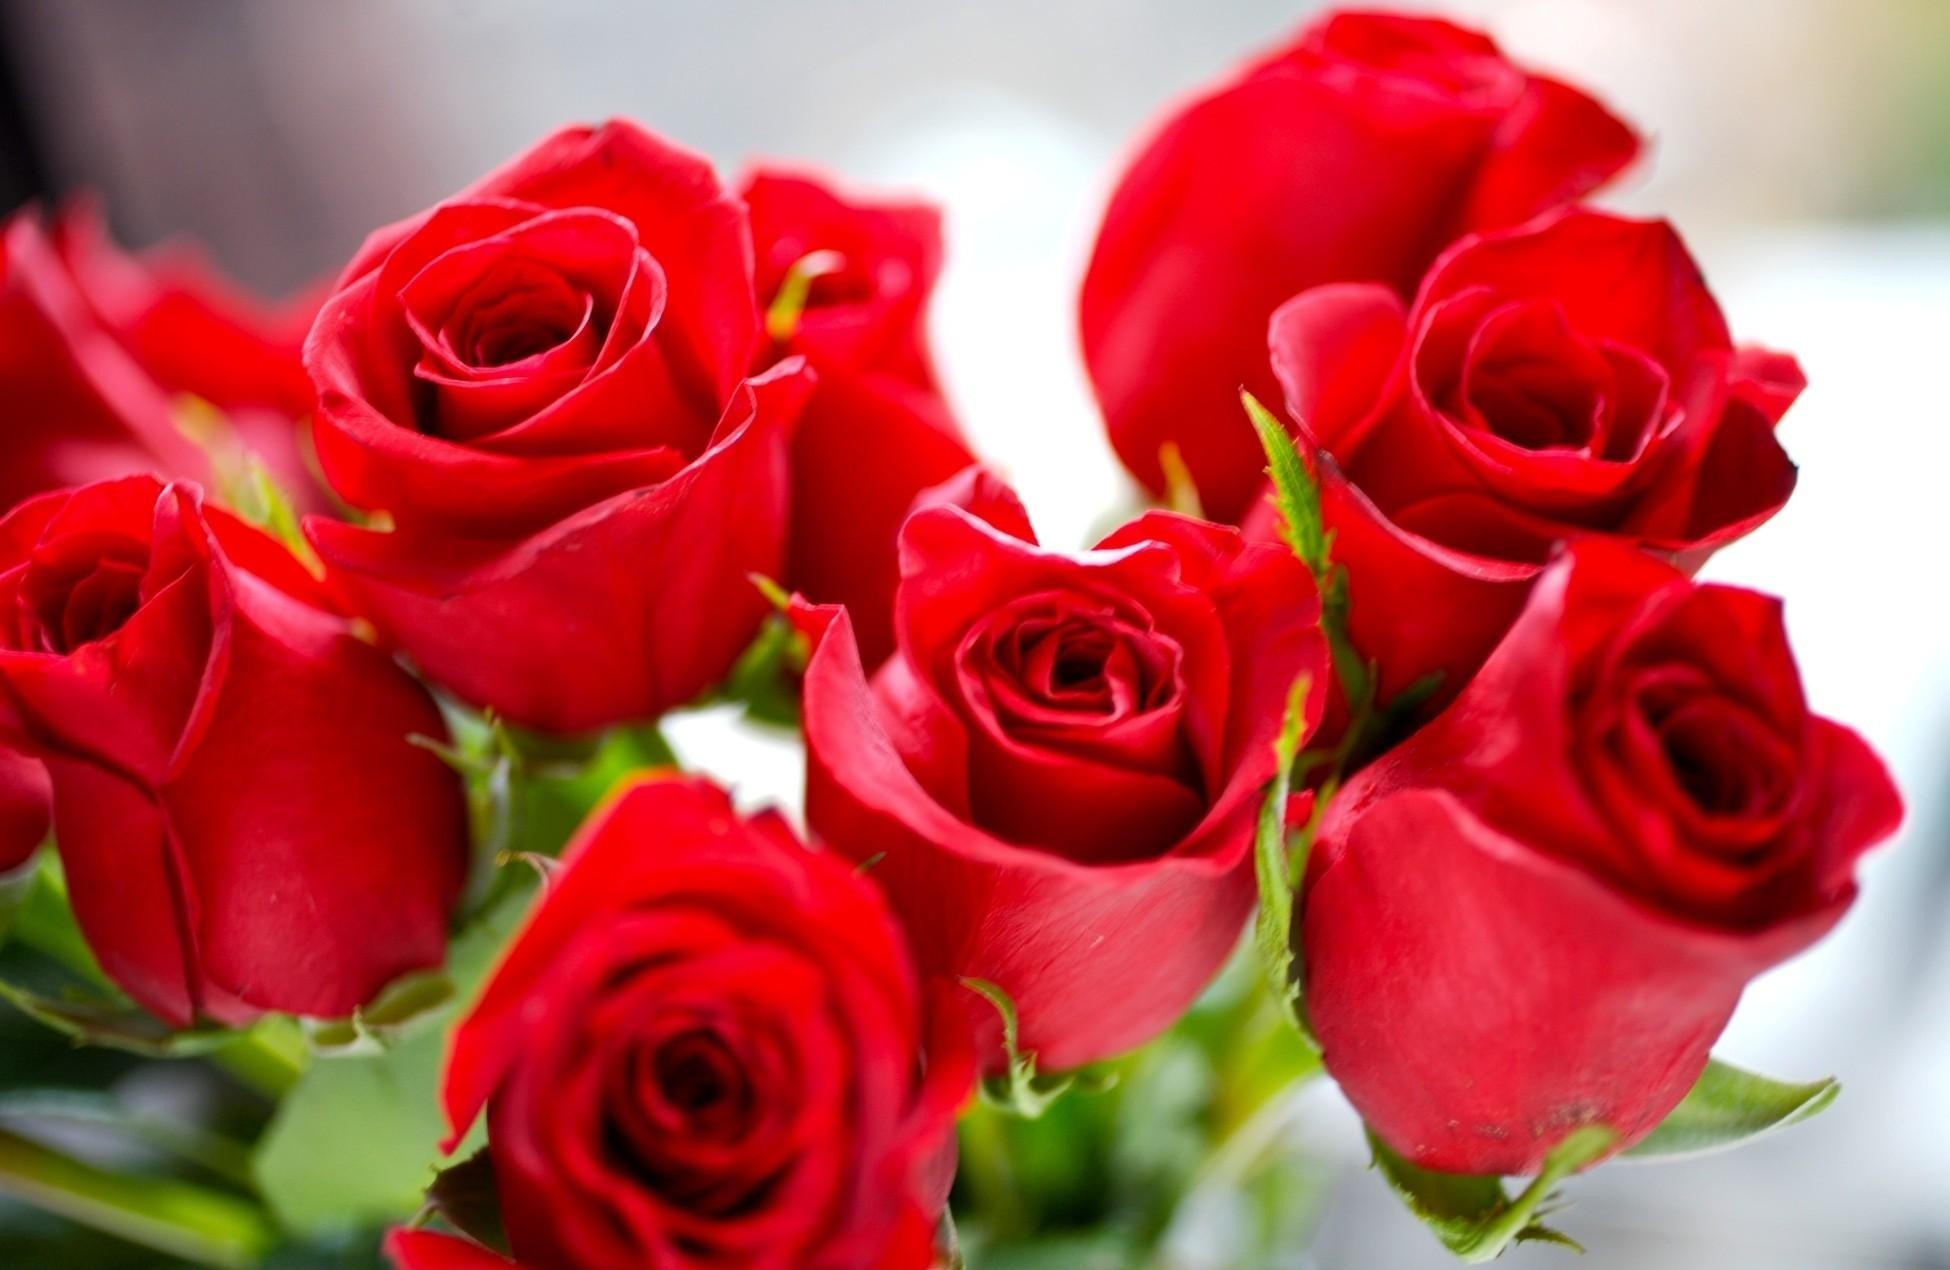 1950x1270 Beautiful Roses High Quality Wallpapers Gallery, SIU.36060972